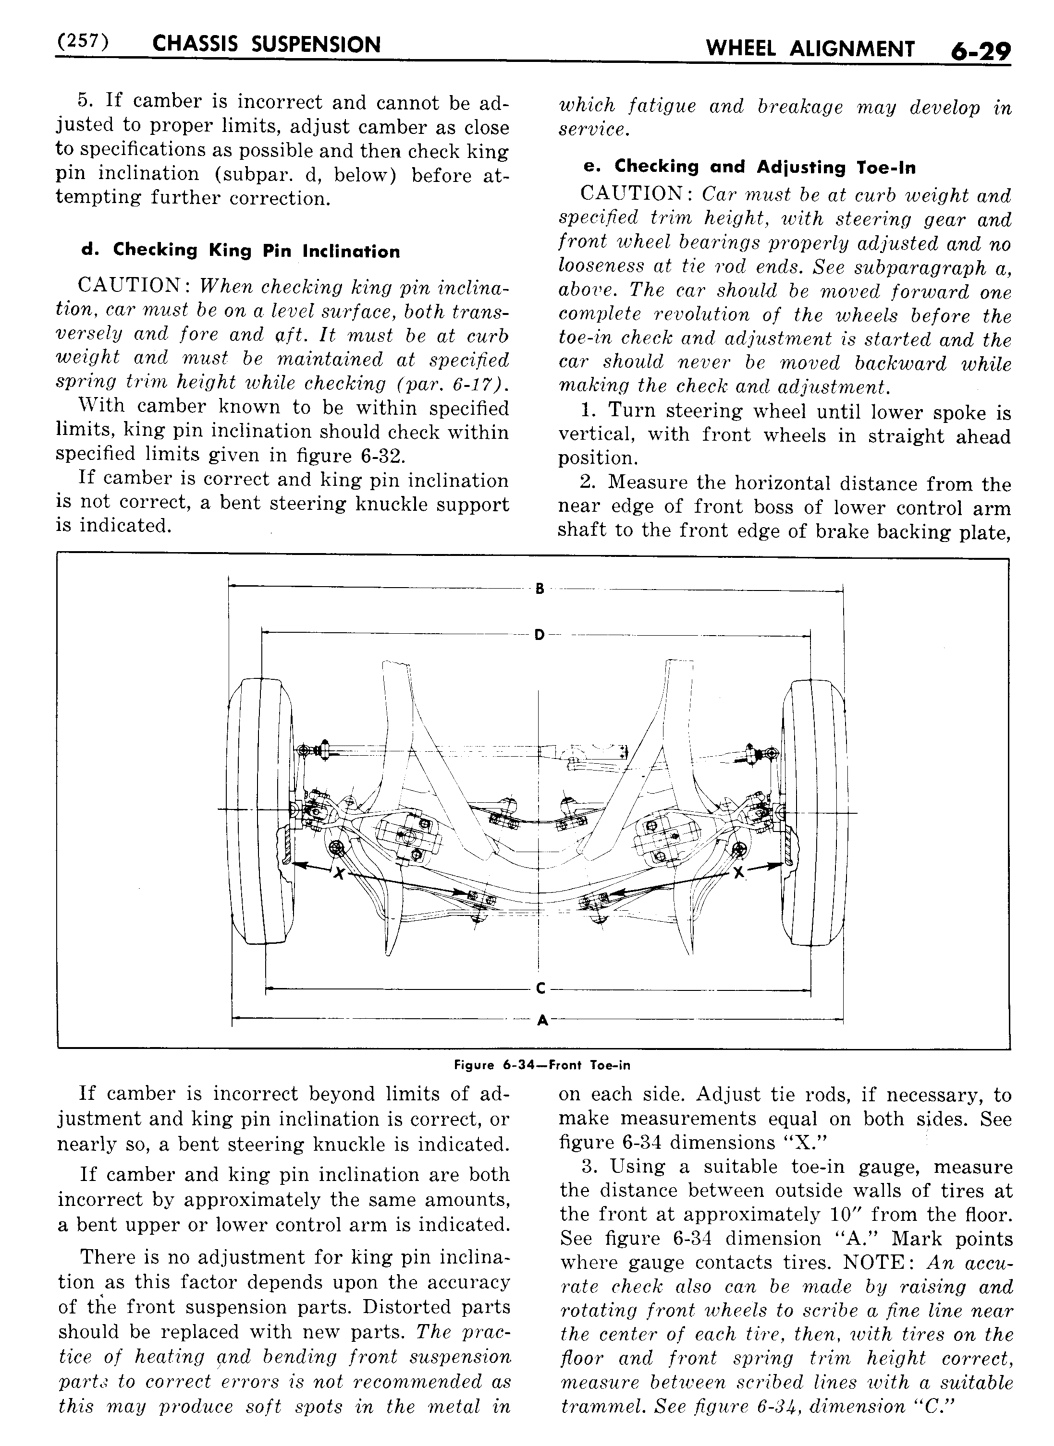 n_07 1951 Buick Shop Manual - Chassis Suspension-029-029.jpg